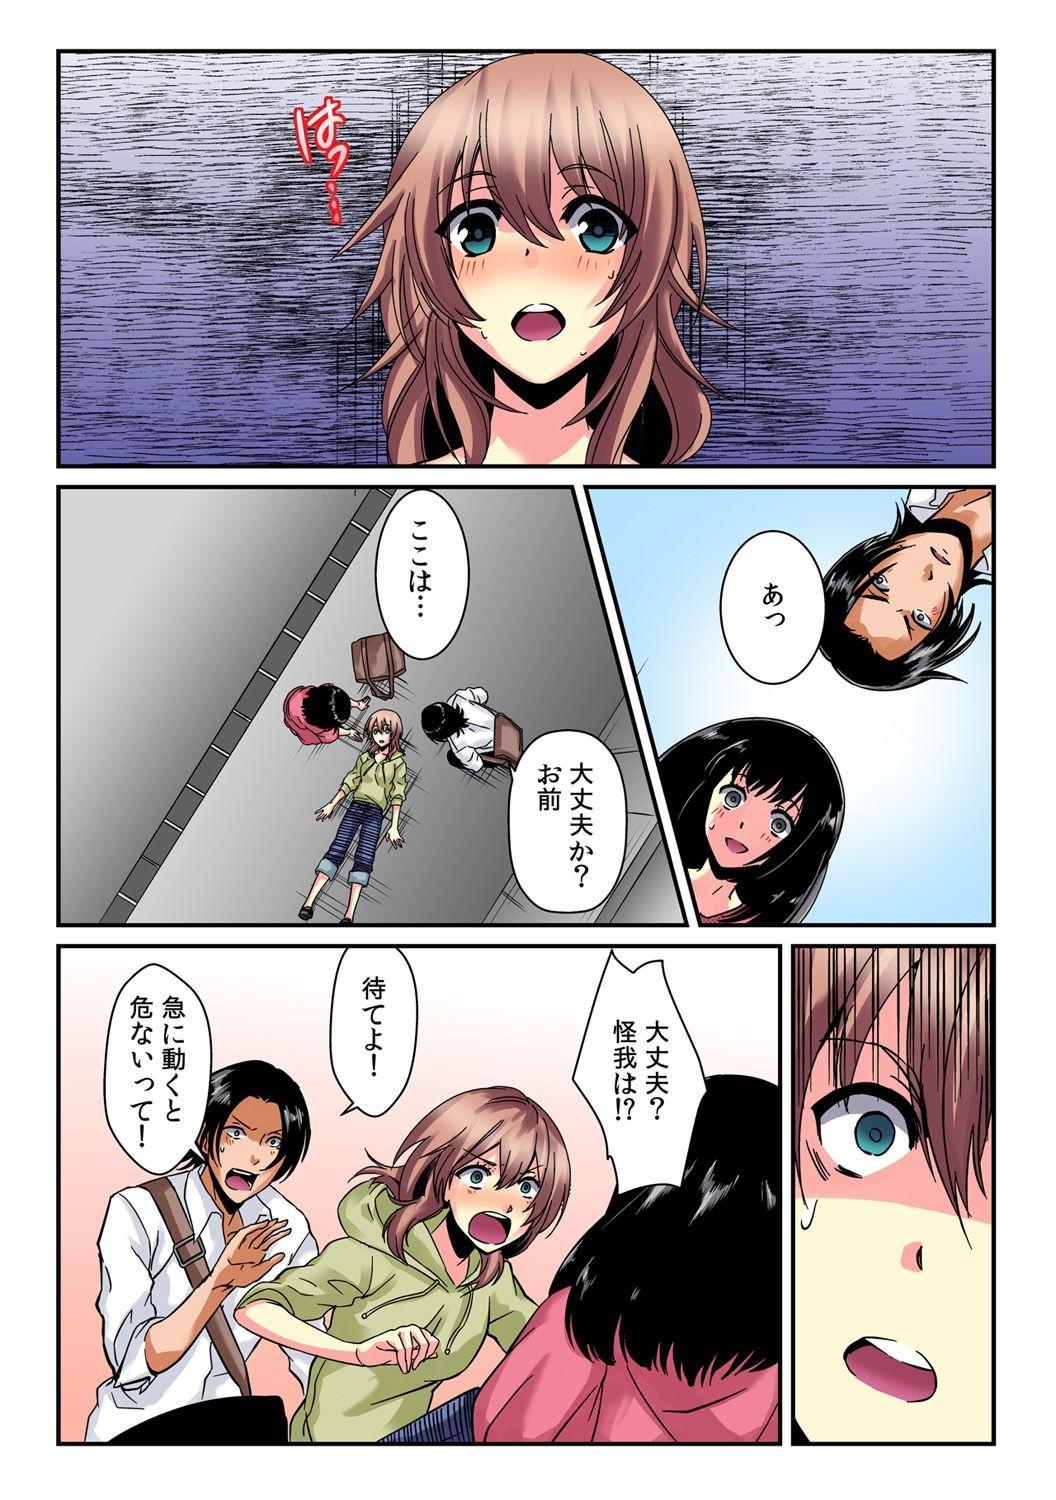 [Akagi Gijou / Akahige] I became a girl- and I definitely can't let anyone find out! (Full color) 1 12